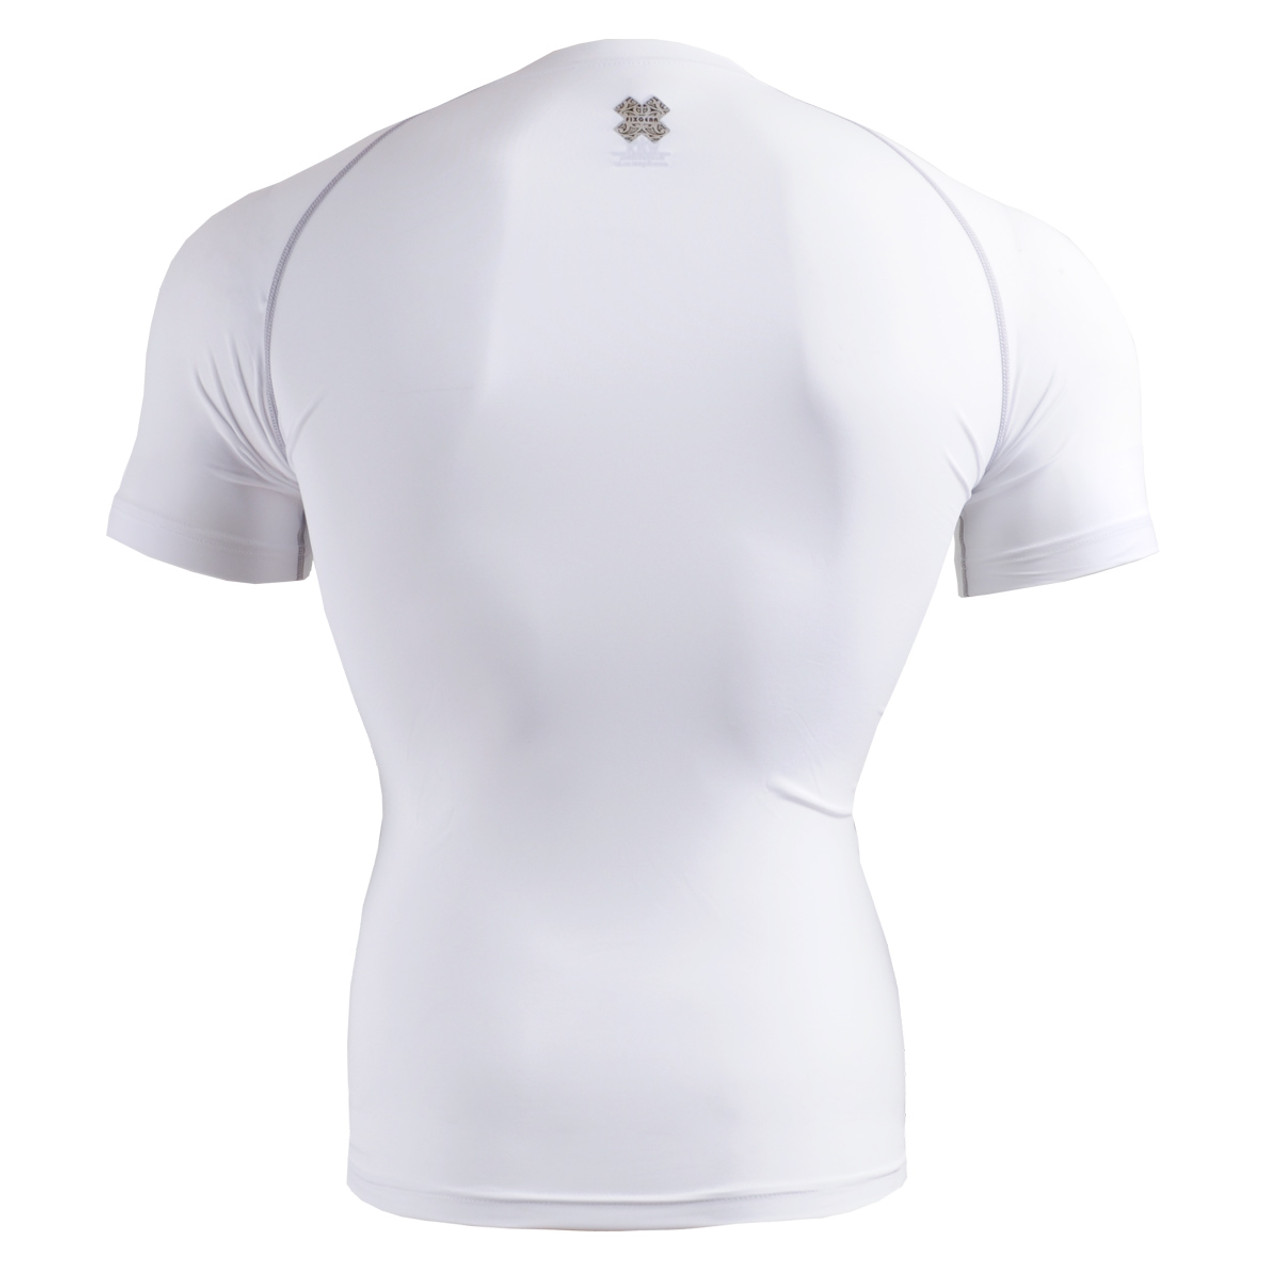 FIXGEAR CPL-WS Compression Base Layer Long Sleeve Shirts, 55% OFF